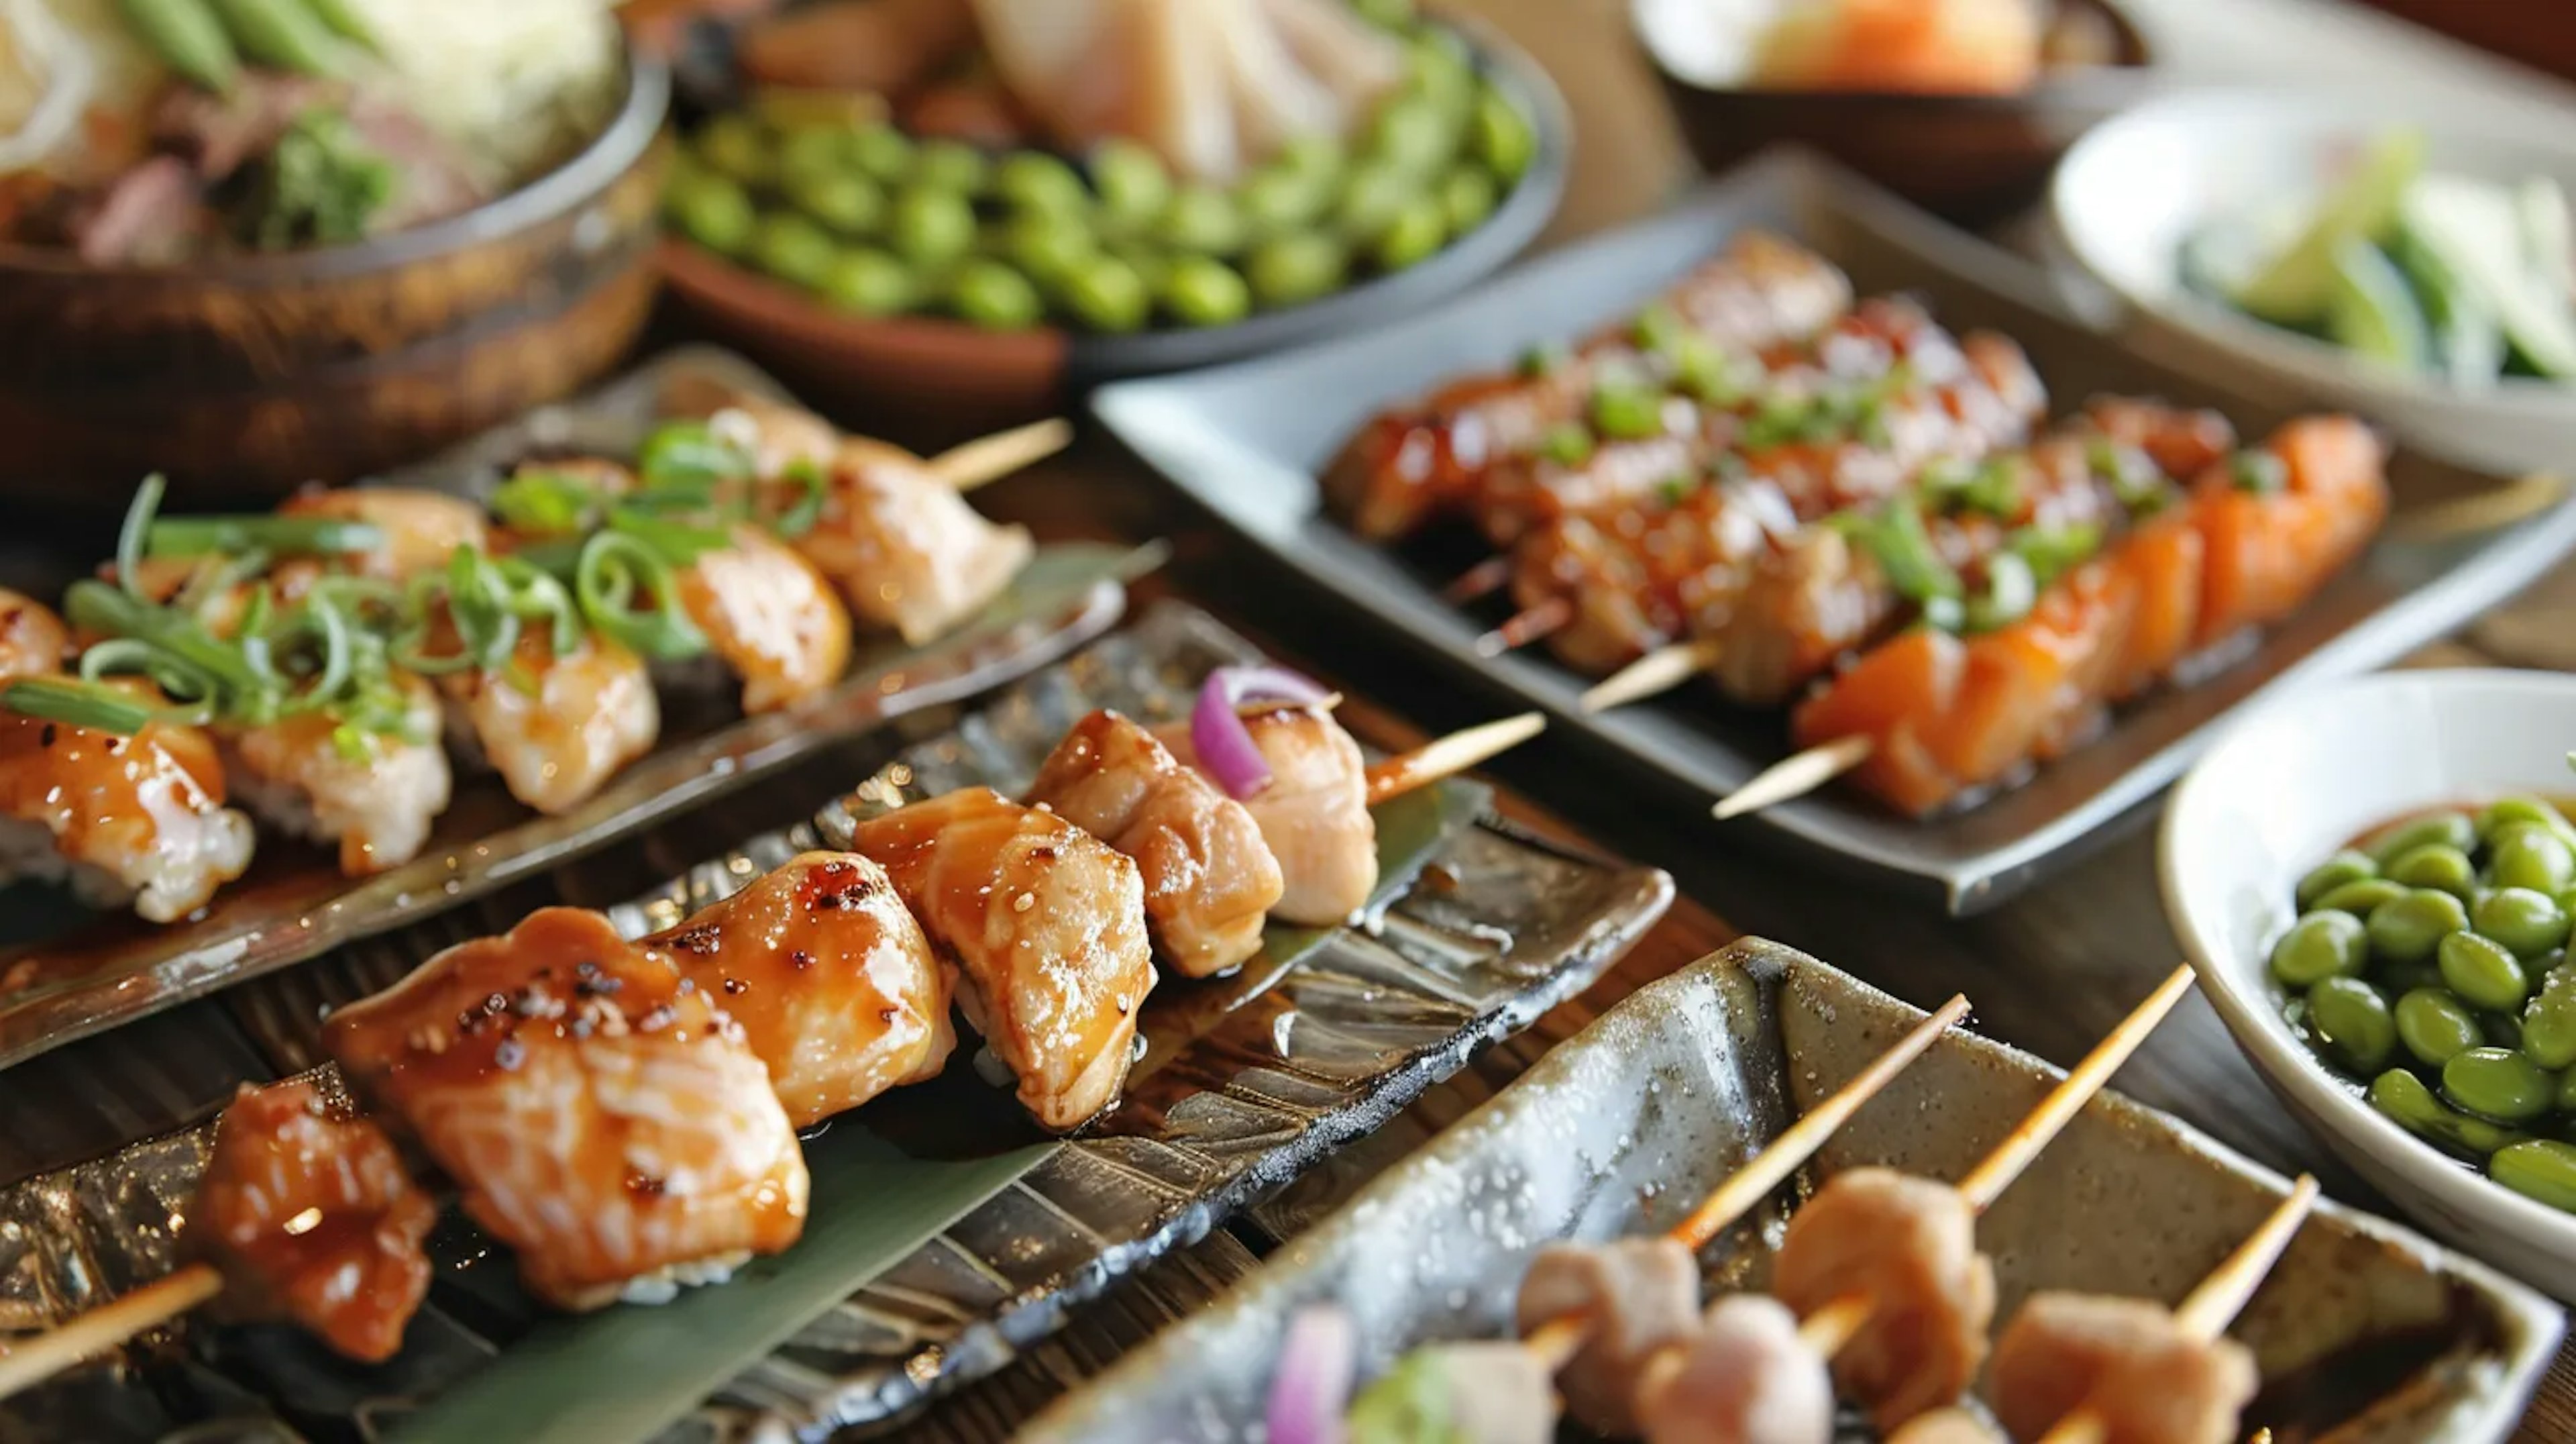 assorted izakaya dishes on a wooden table, showcasing the variety and communal eating style of Japanese casual dining